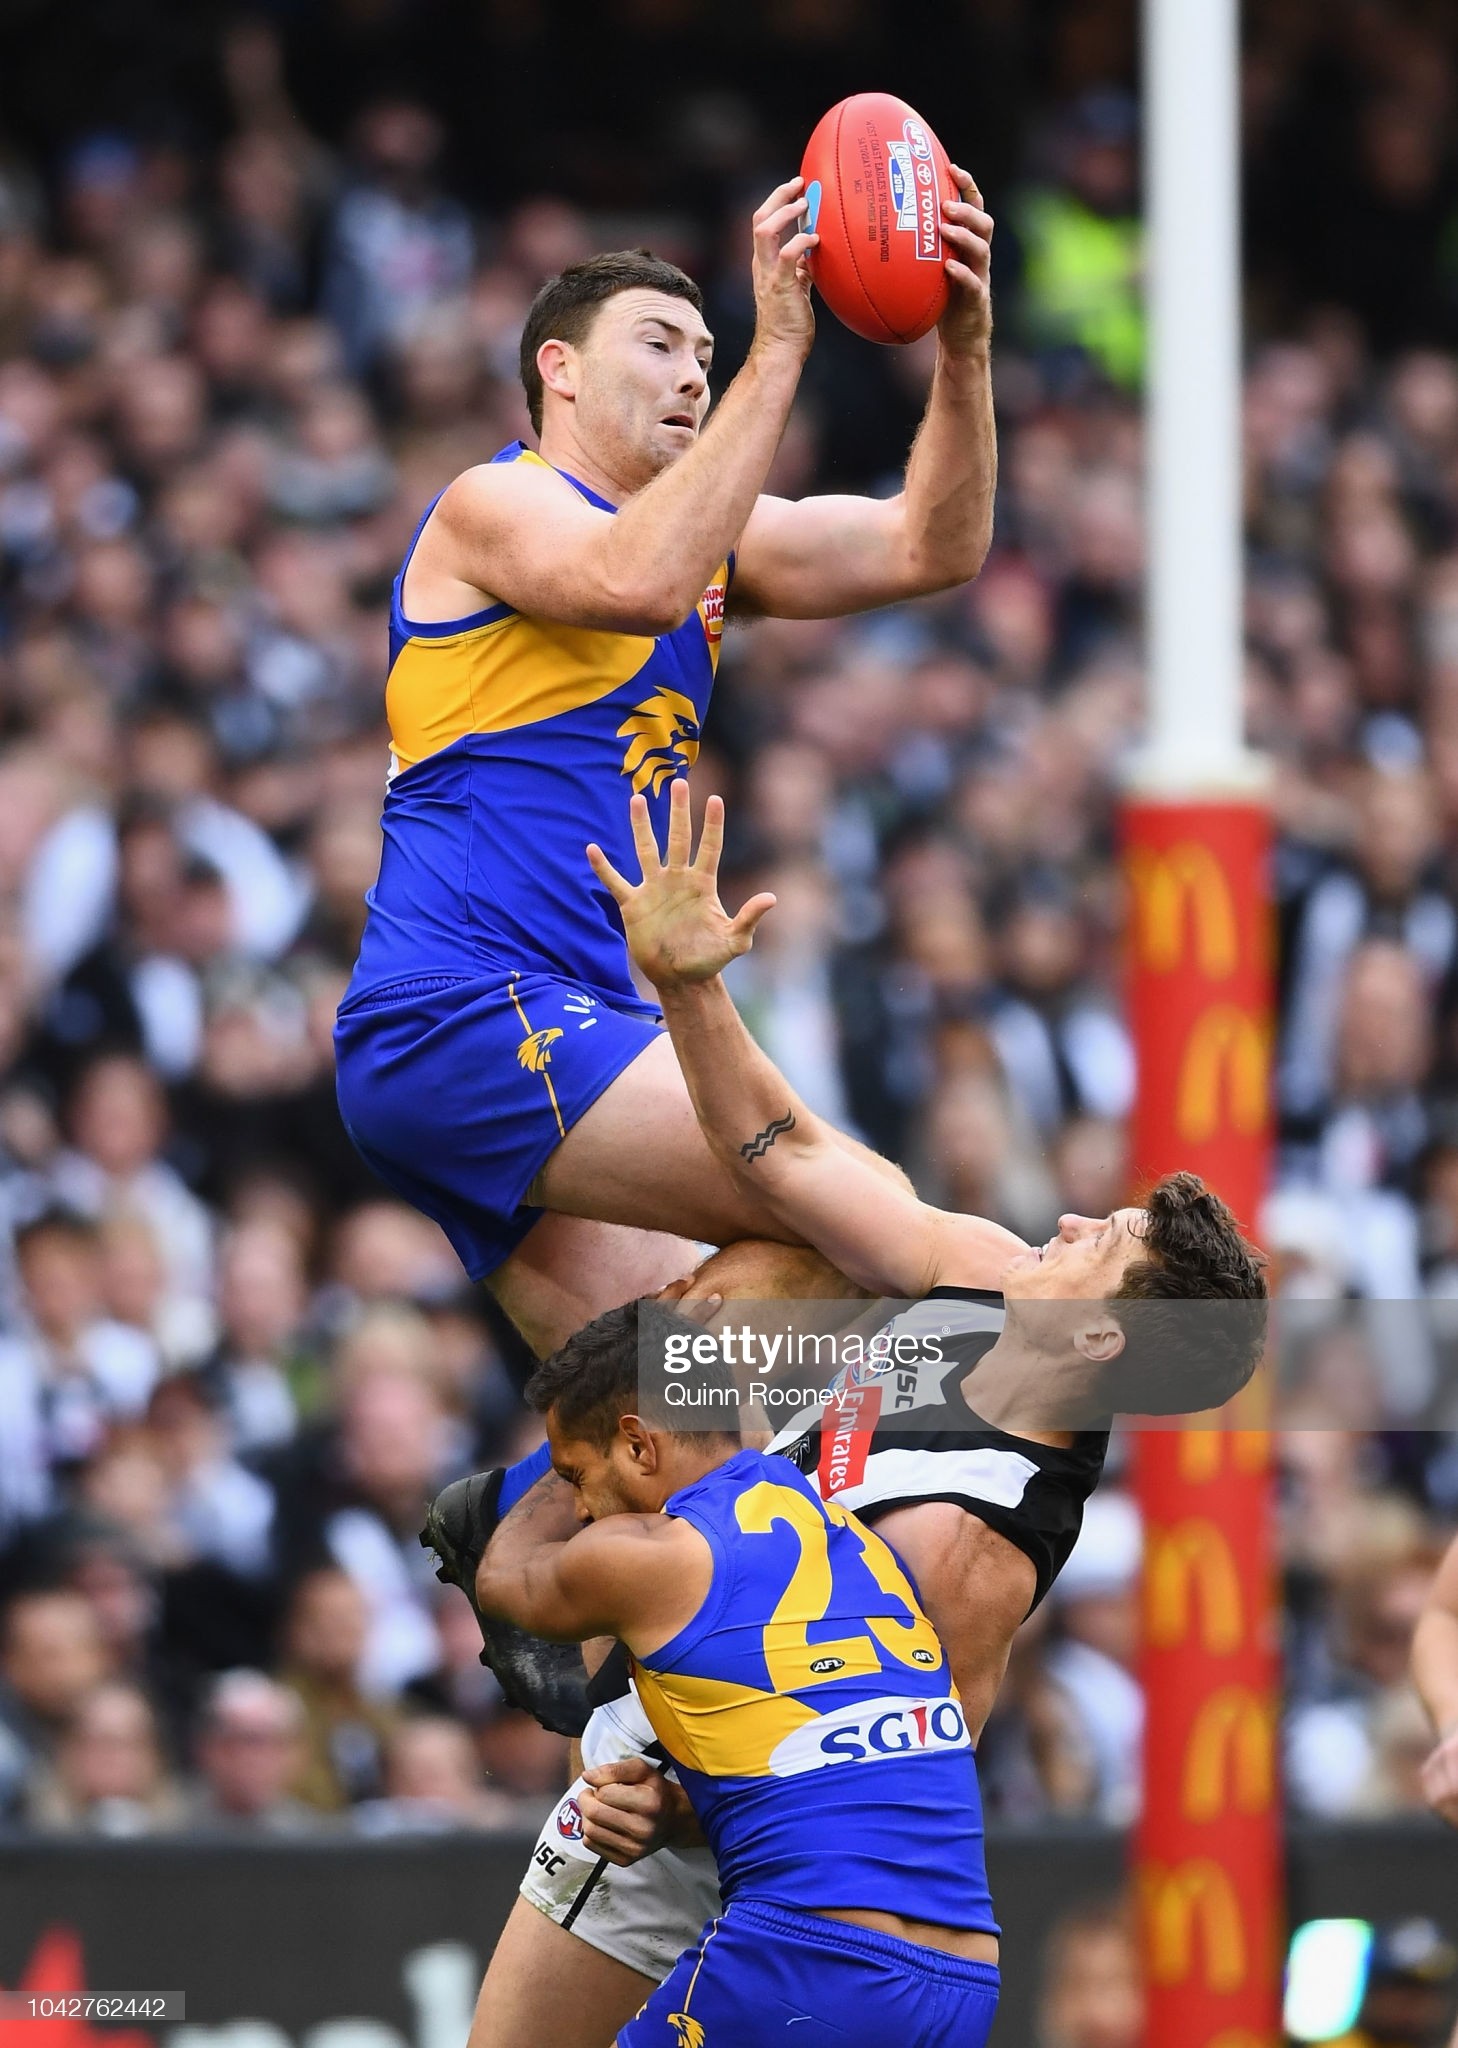 jeremy-mcgovern-of-the-eagles-marks-during-the-2018-afl-grand-final-picture-id1042762442